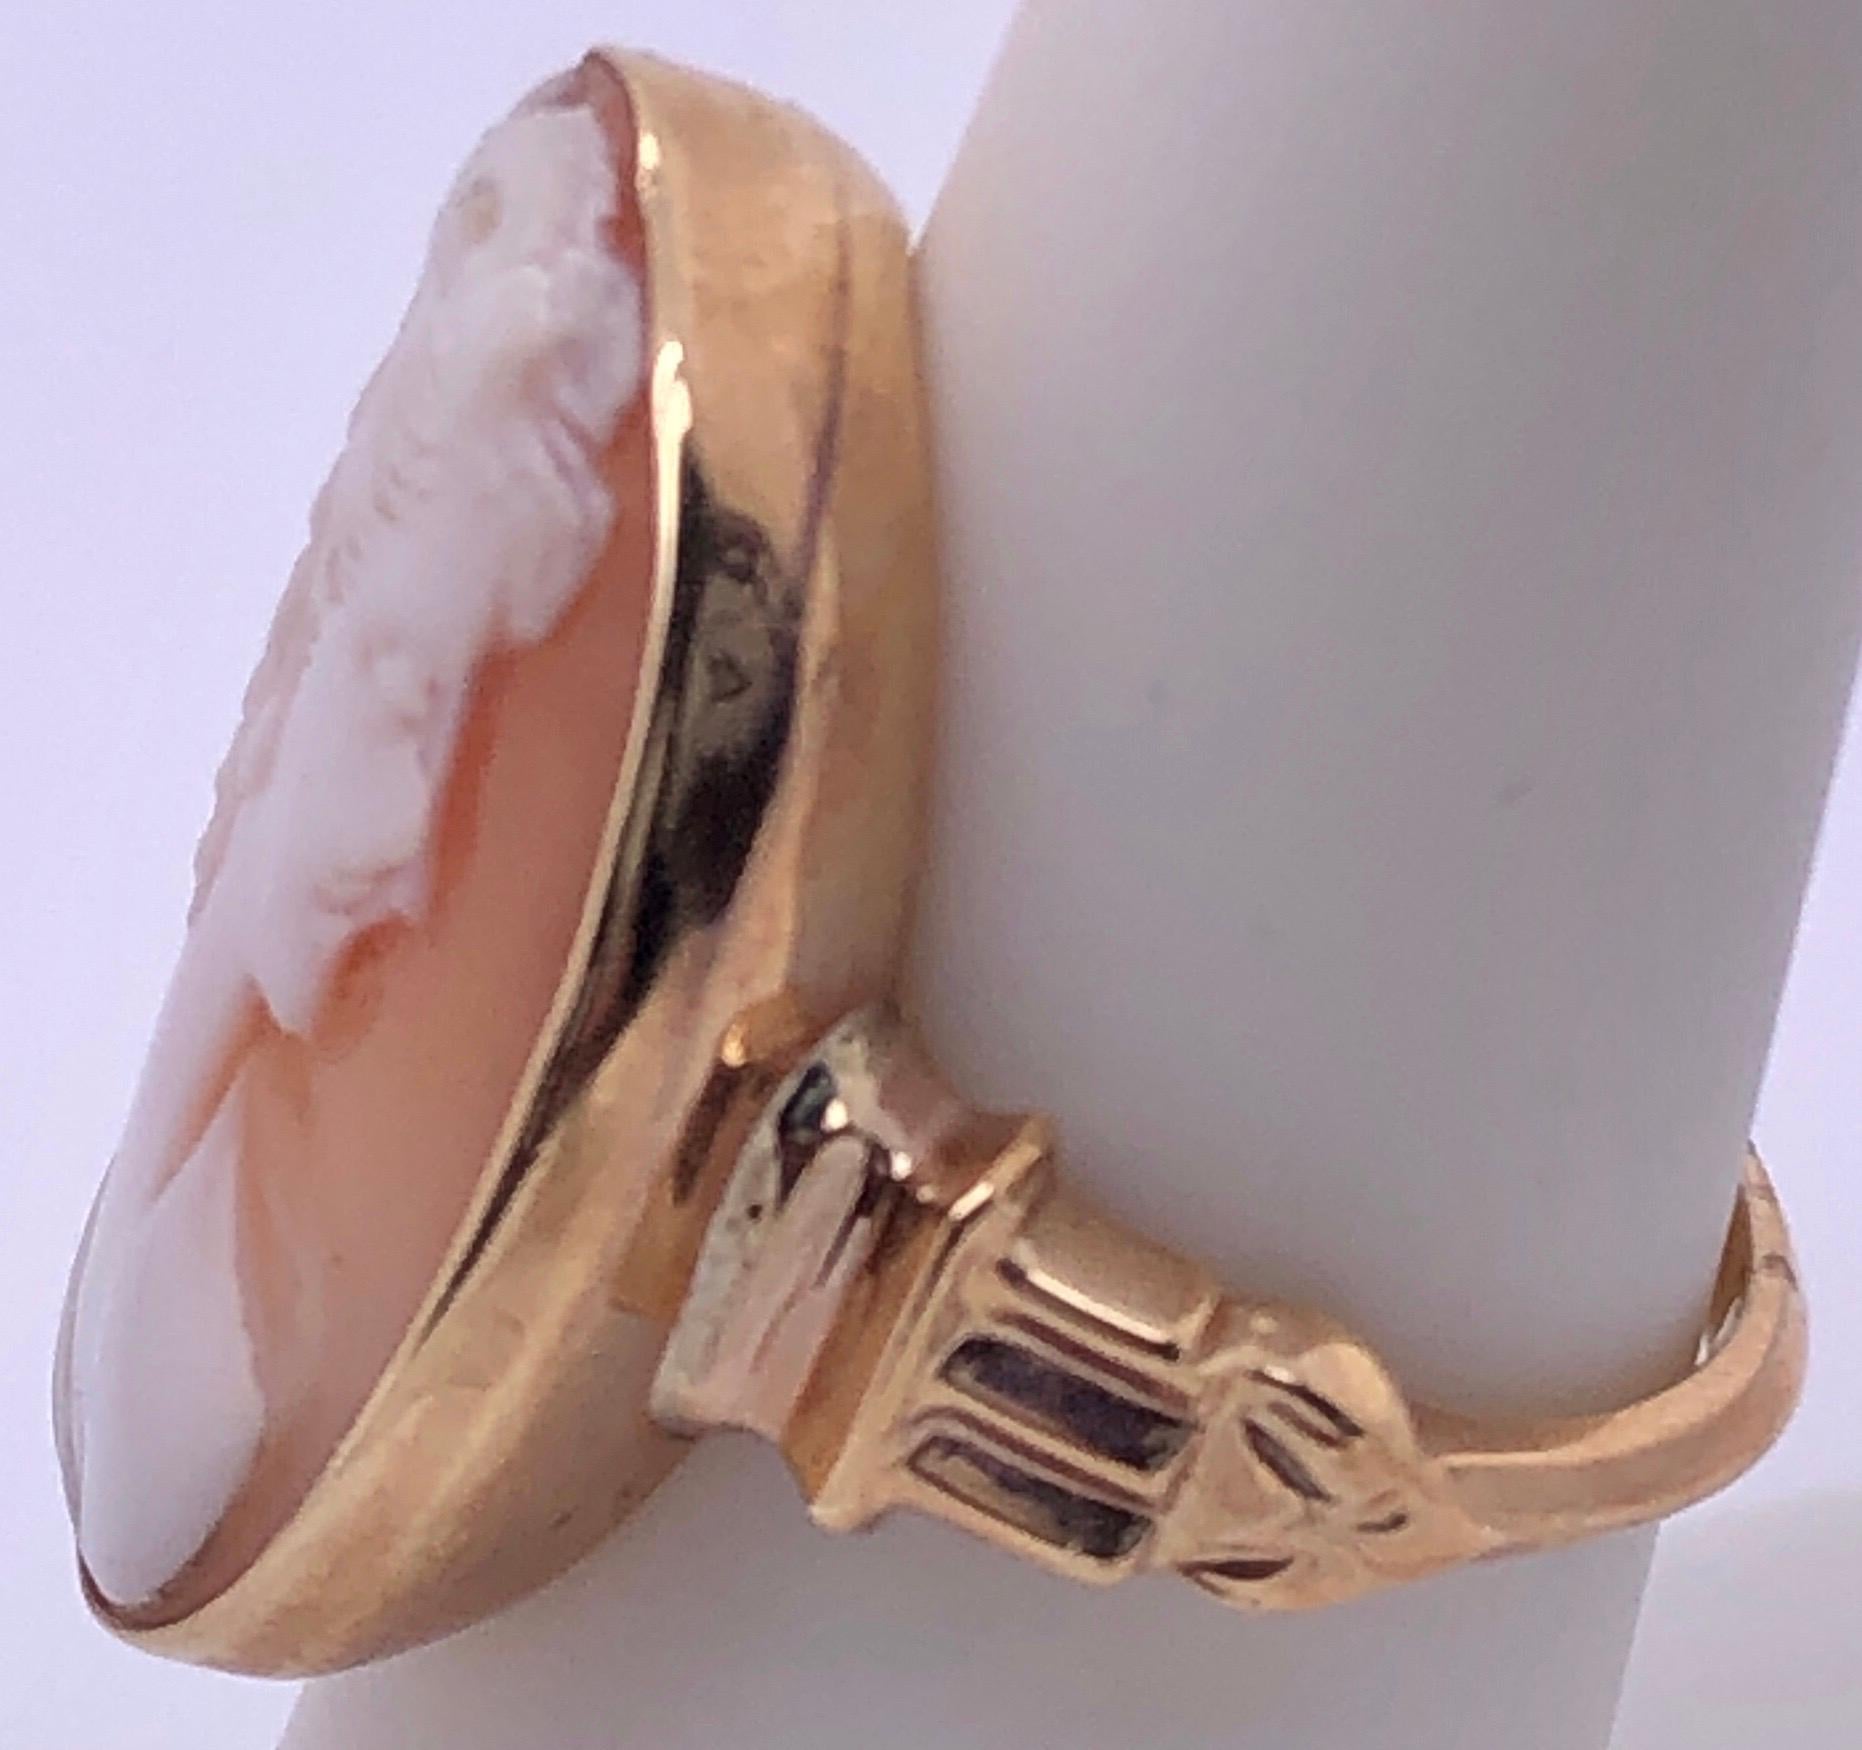 14 Karat Yellow Gold Bezeled Cameo Ring Size 6.5
6 grams total weight.